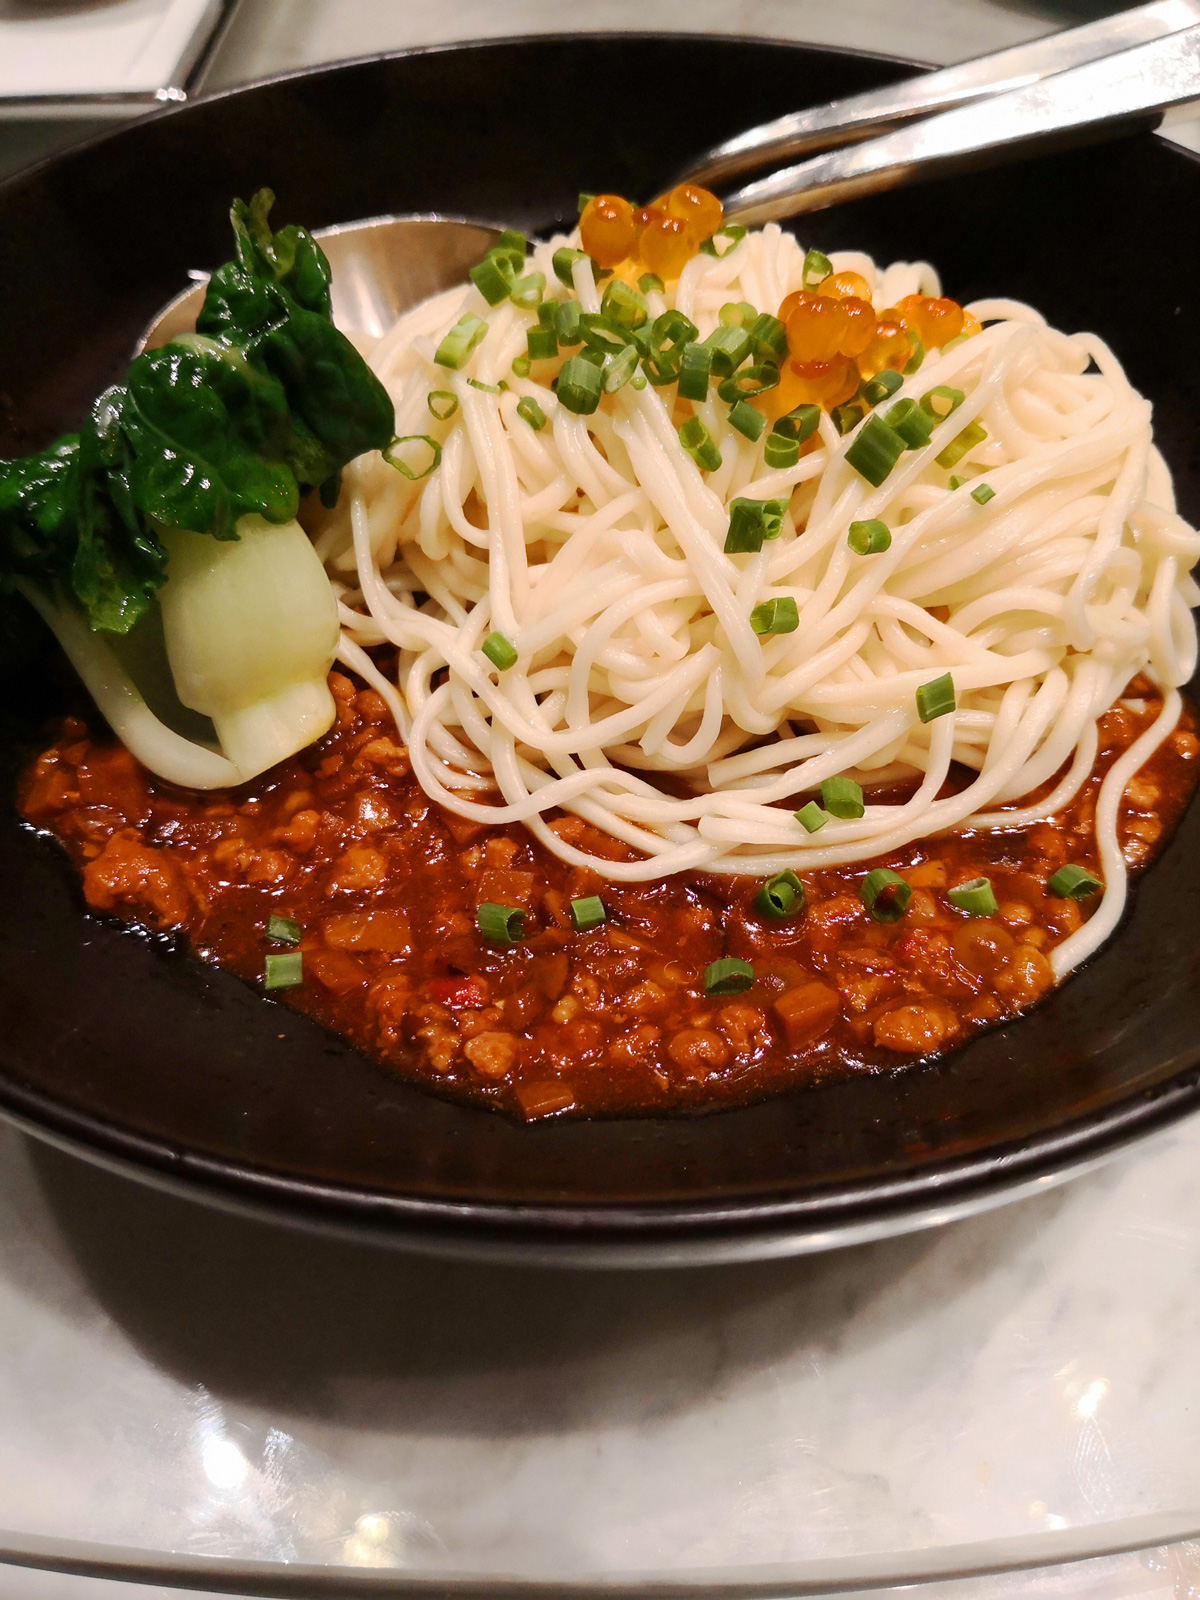 Hand-pulled noodles with spicy minced pork, cod roe, chopped spring onions and seasoning.